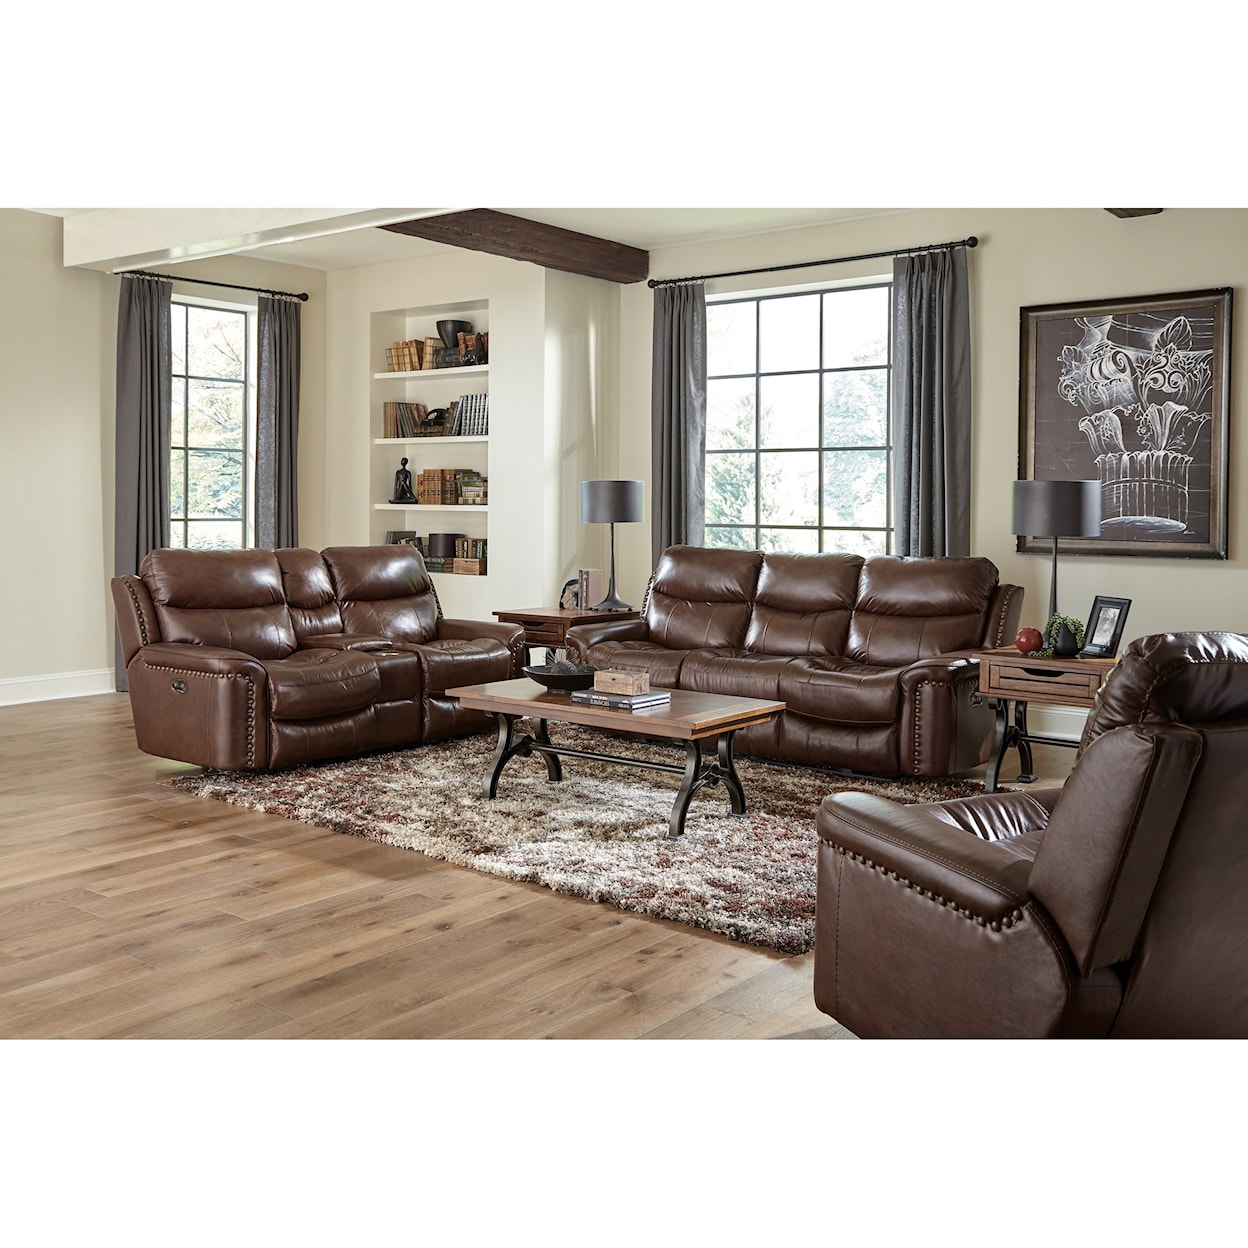 Catnapper 488 Ceretti Power Reclining Living Room Group